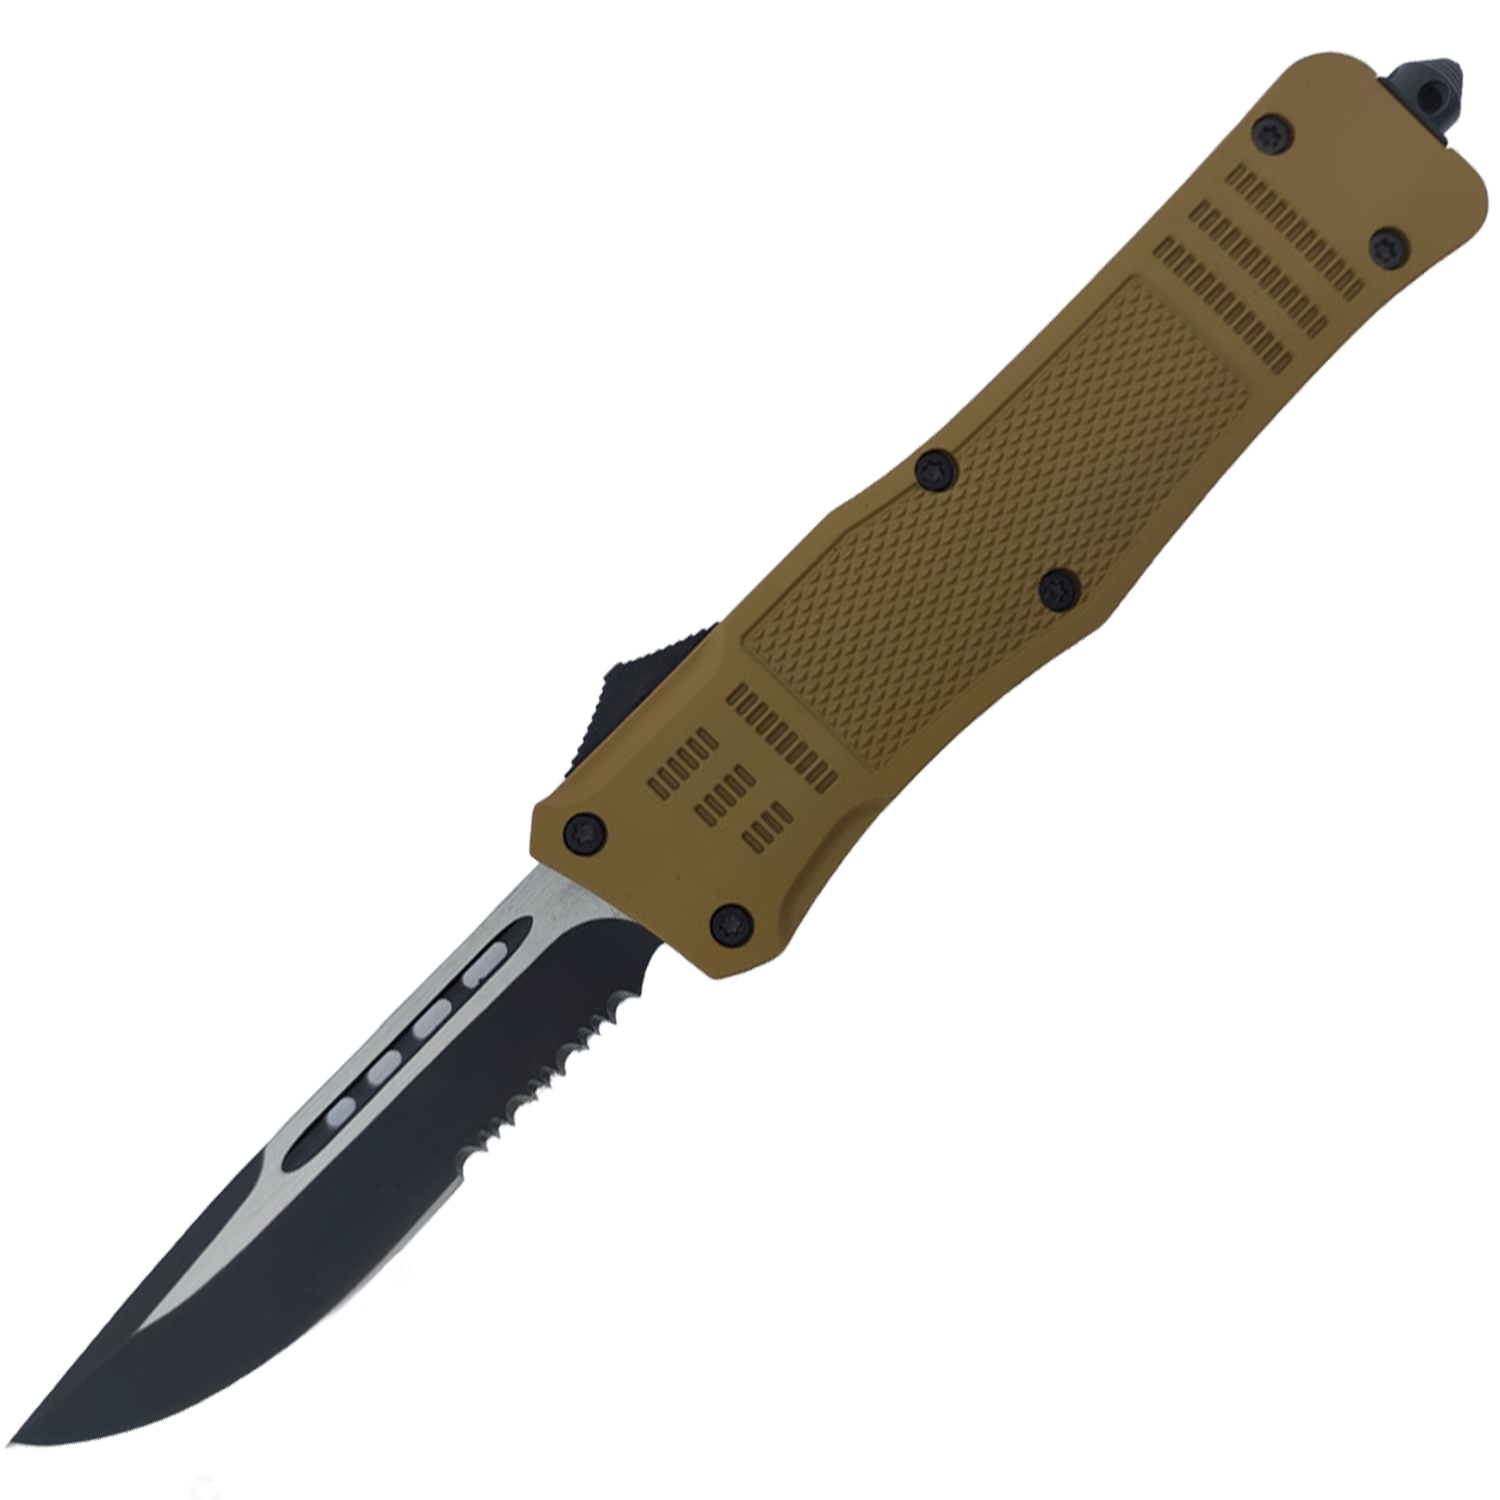 Covert OPS USA OTF Automatic Knife 9 inch Tan D2 Steel Blade DP